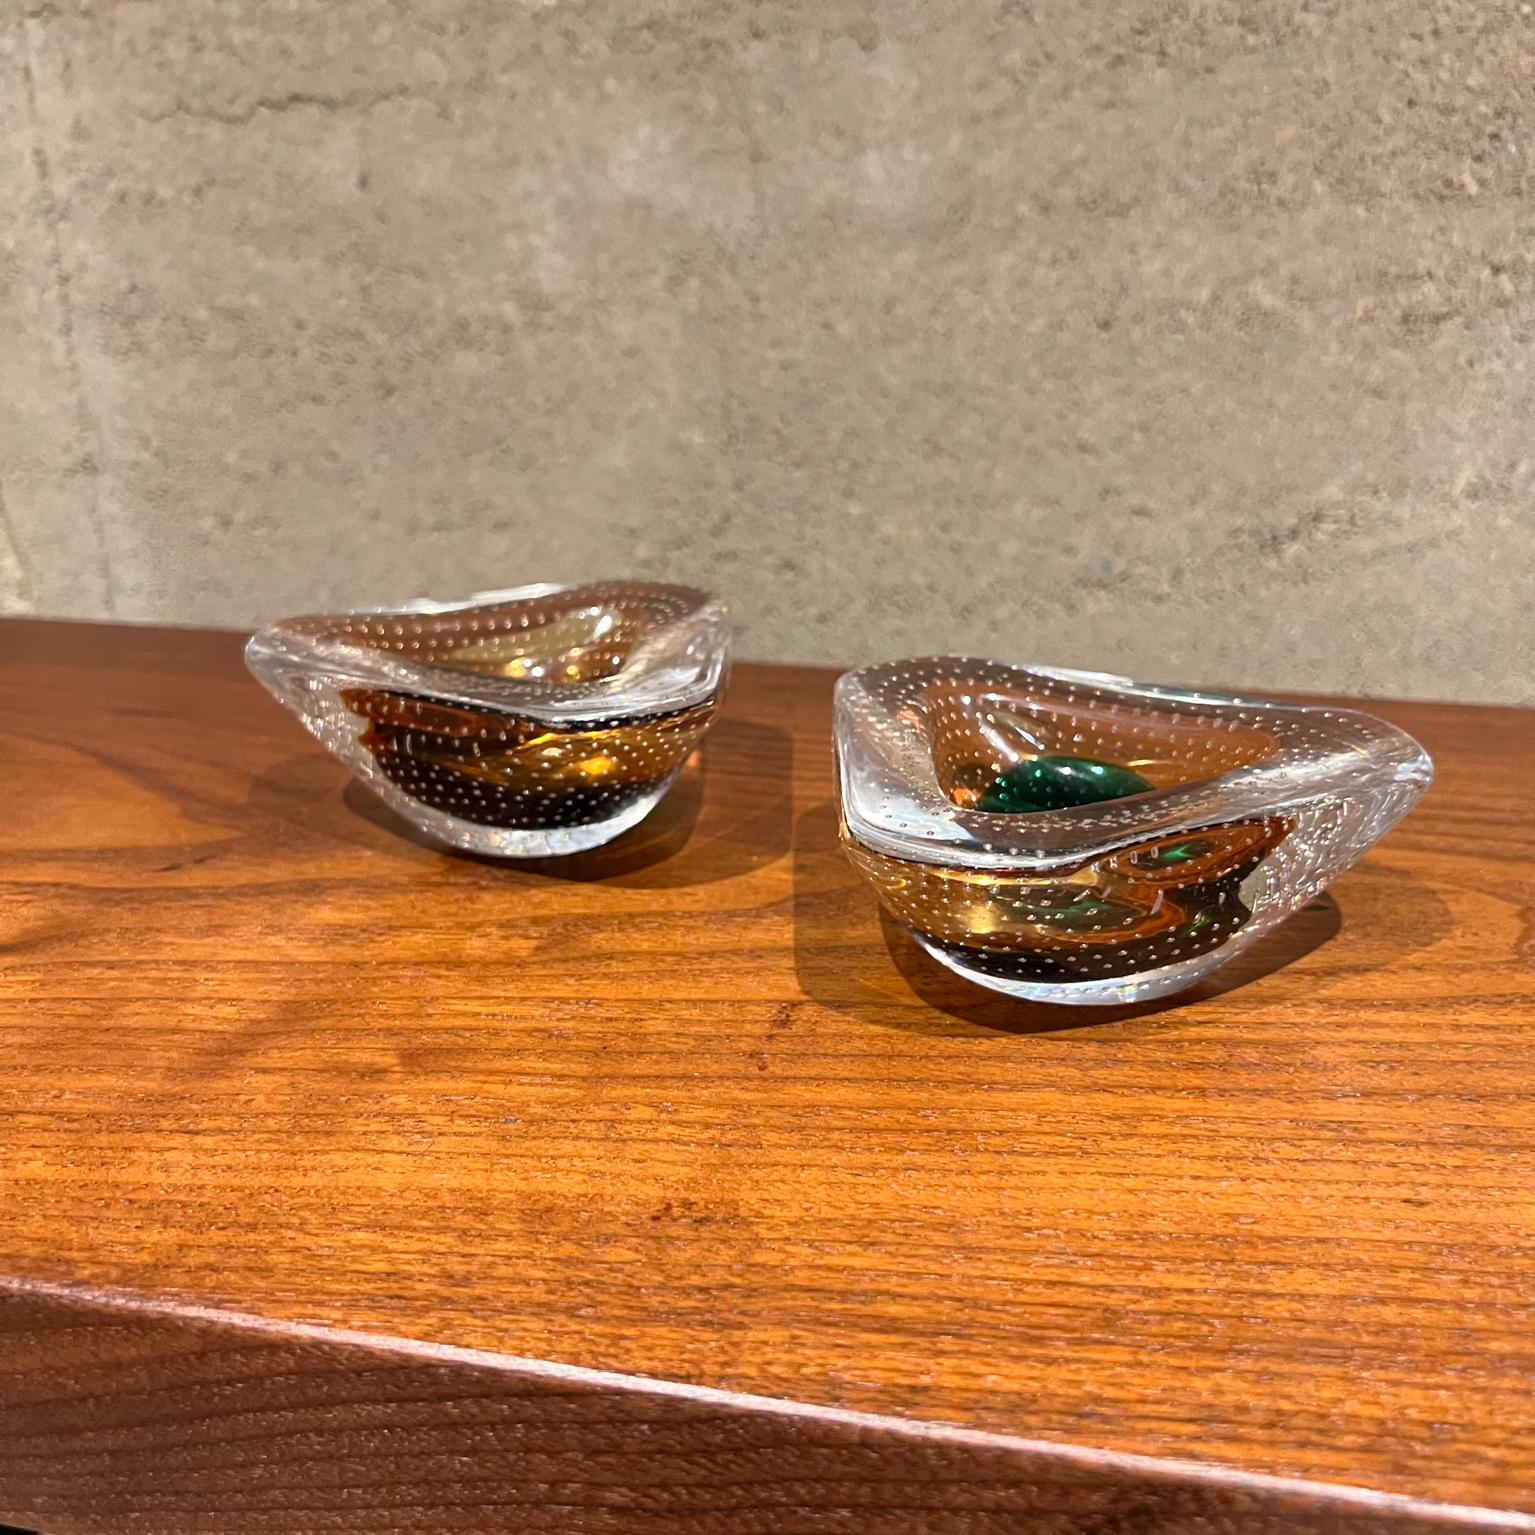 1950s Murano Art Glass Bowls Ashtray Trinket Italy
set of two
controlled bubble
2 h x 4.75 x 4.75
Original vintage condition
Refer to images provided.